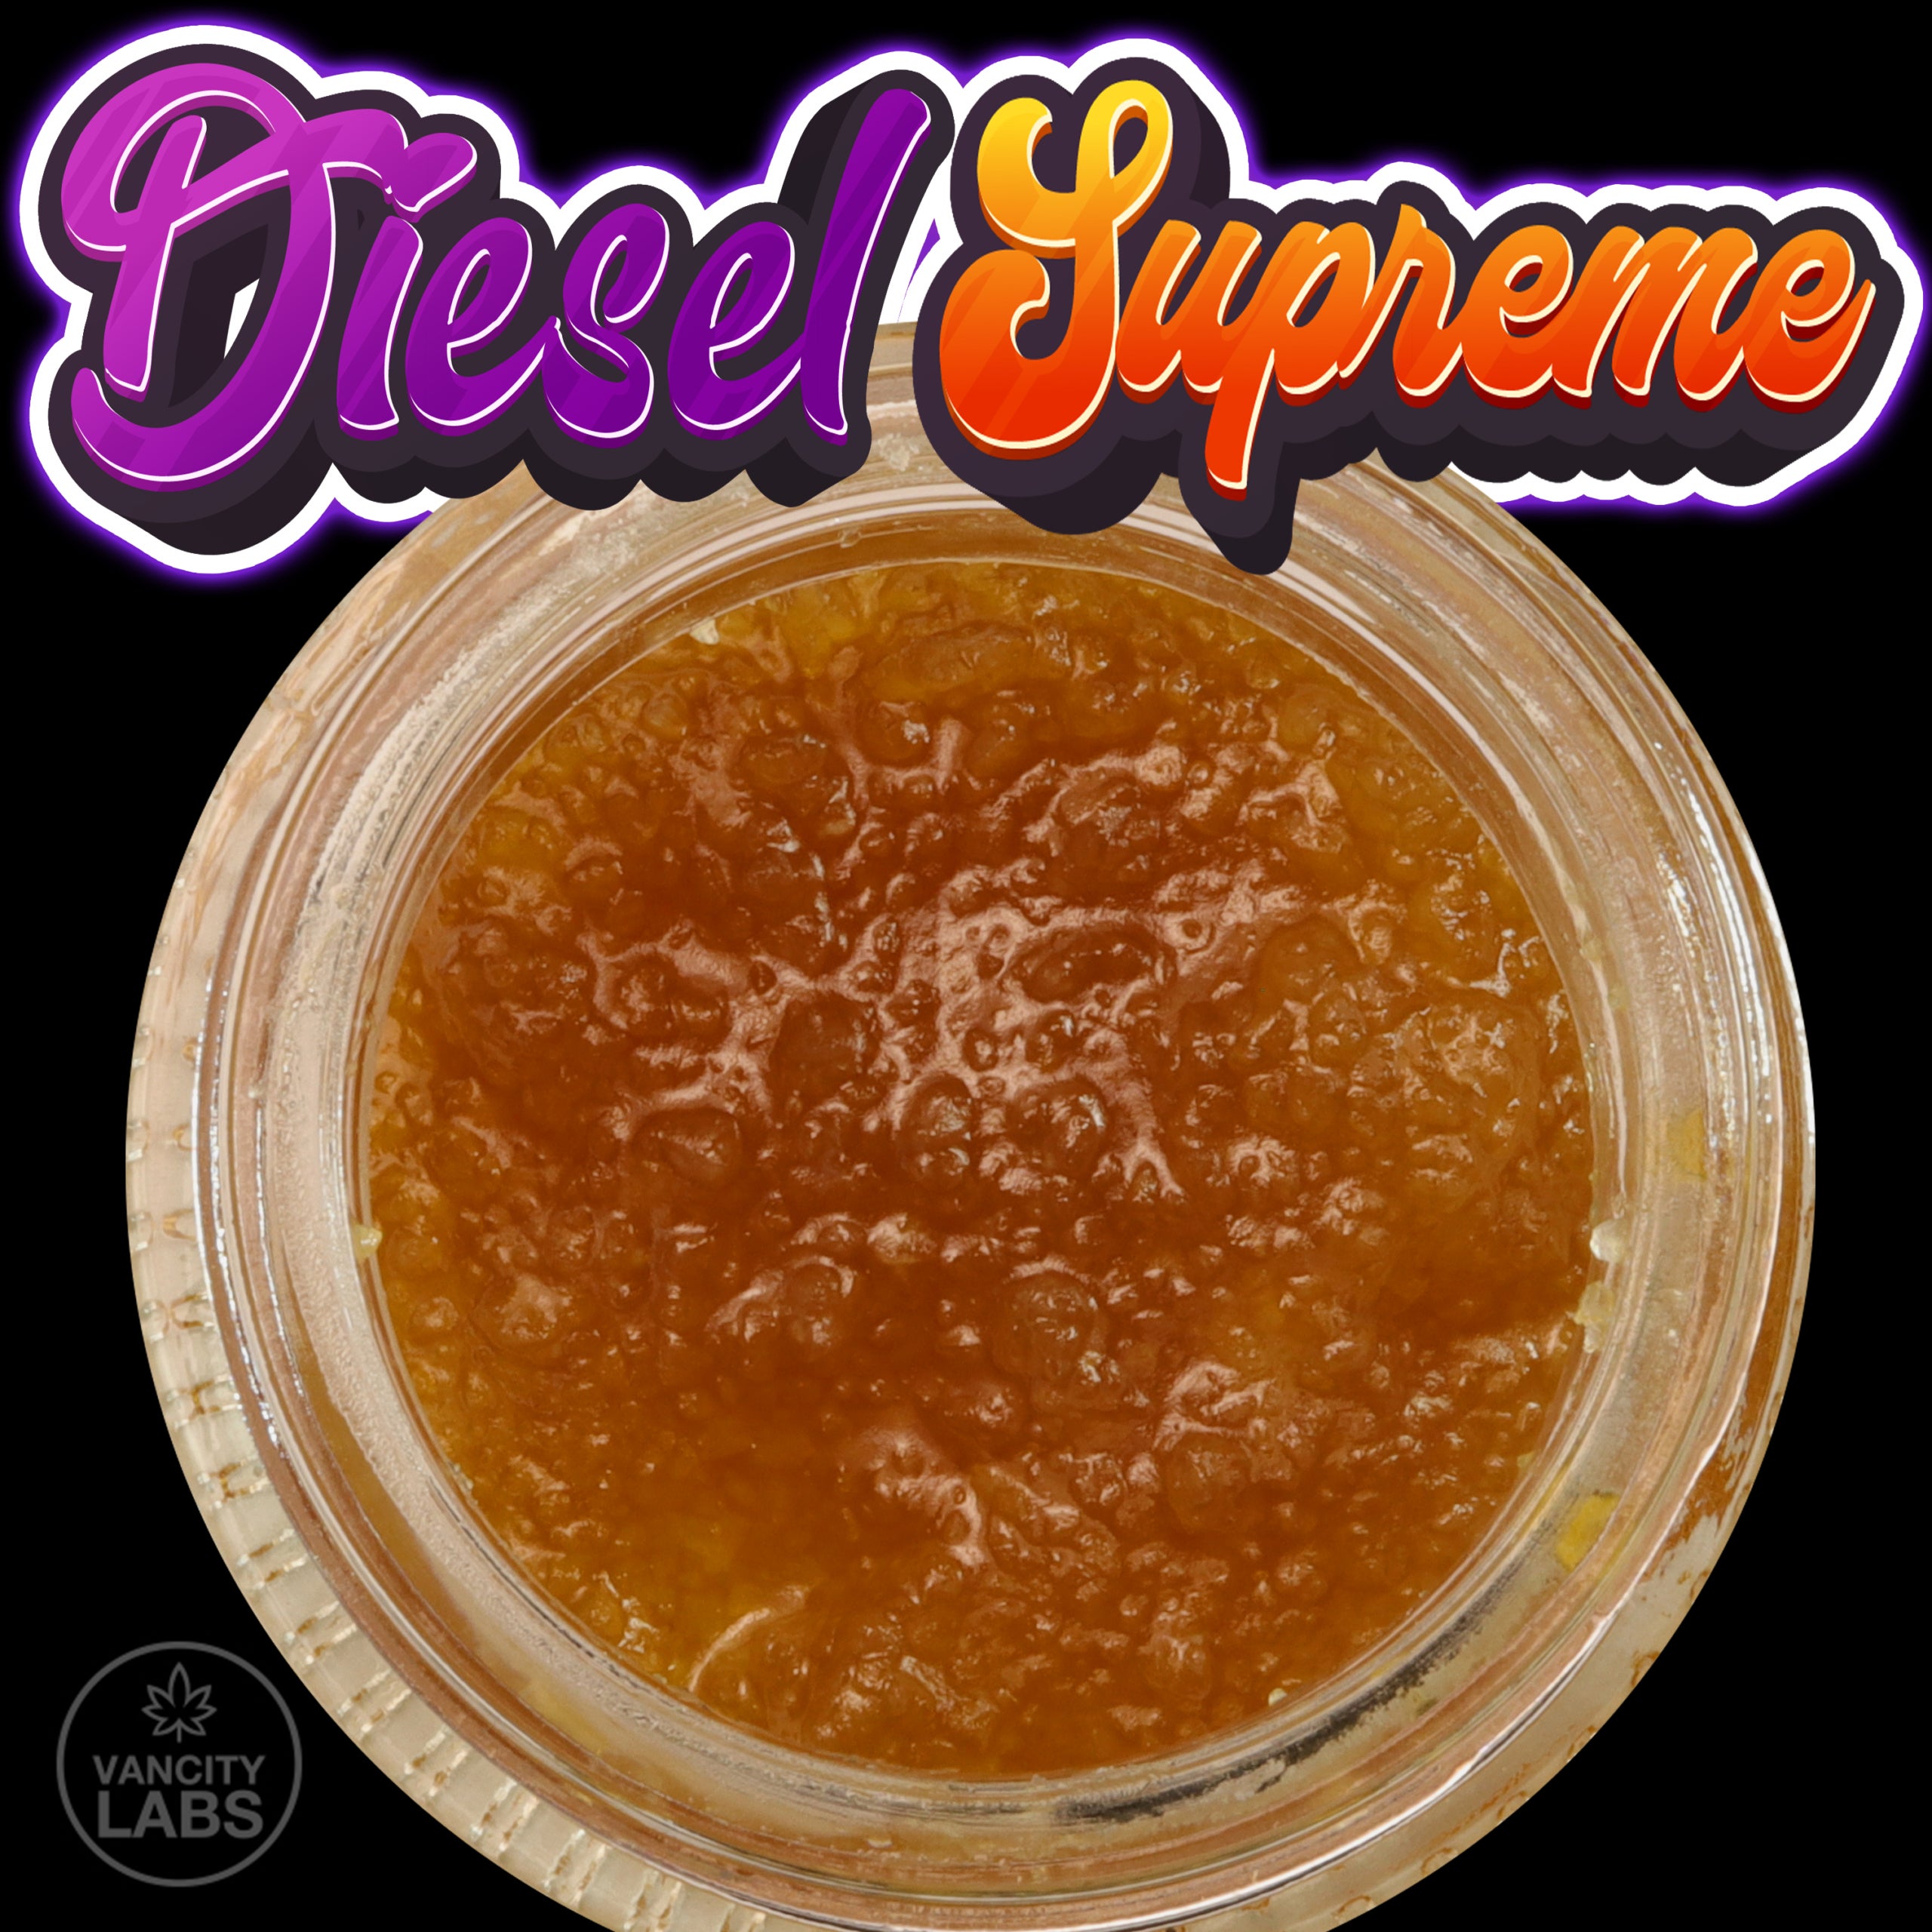 Diesel Supreme VCL Extract